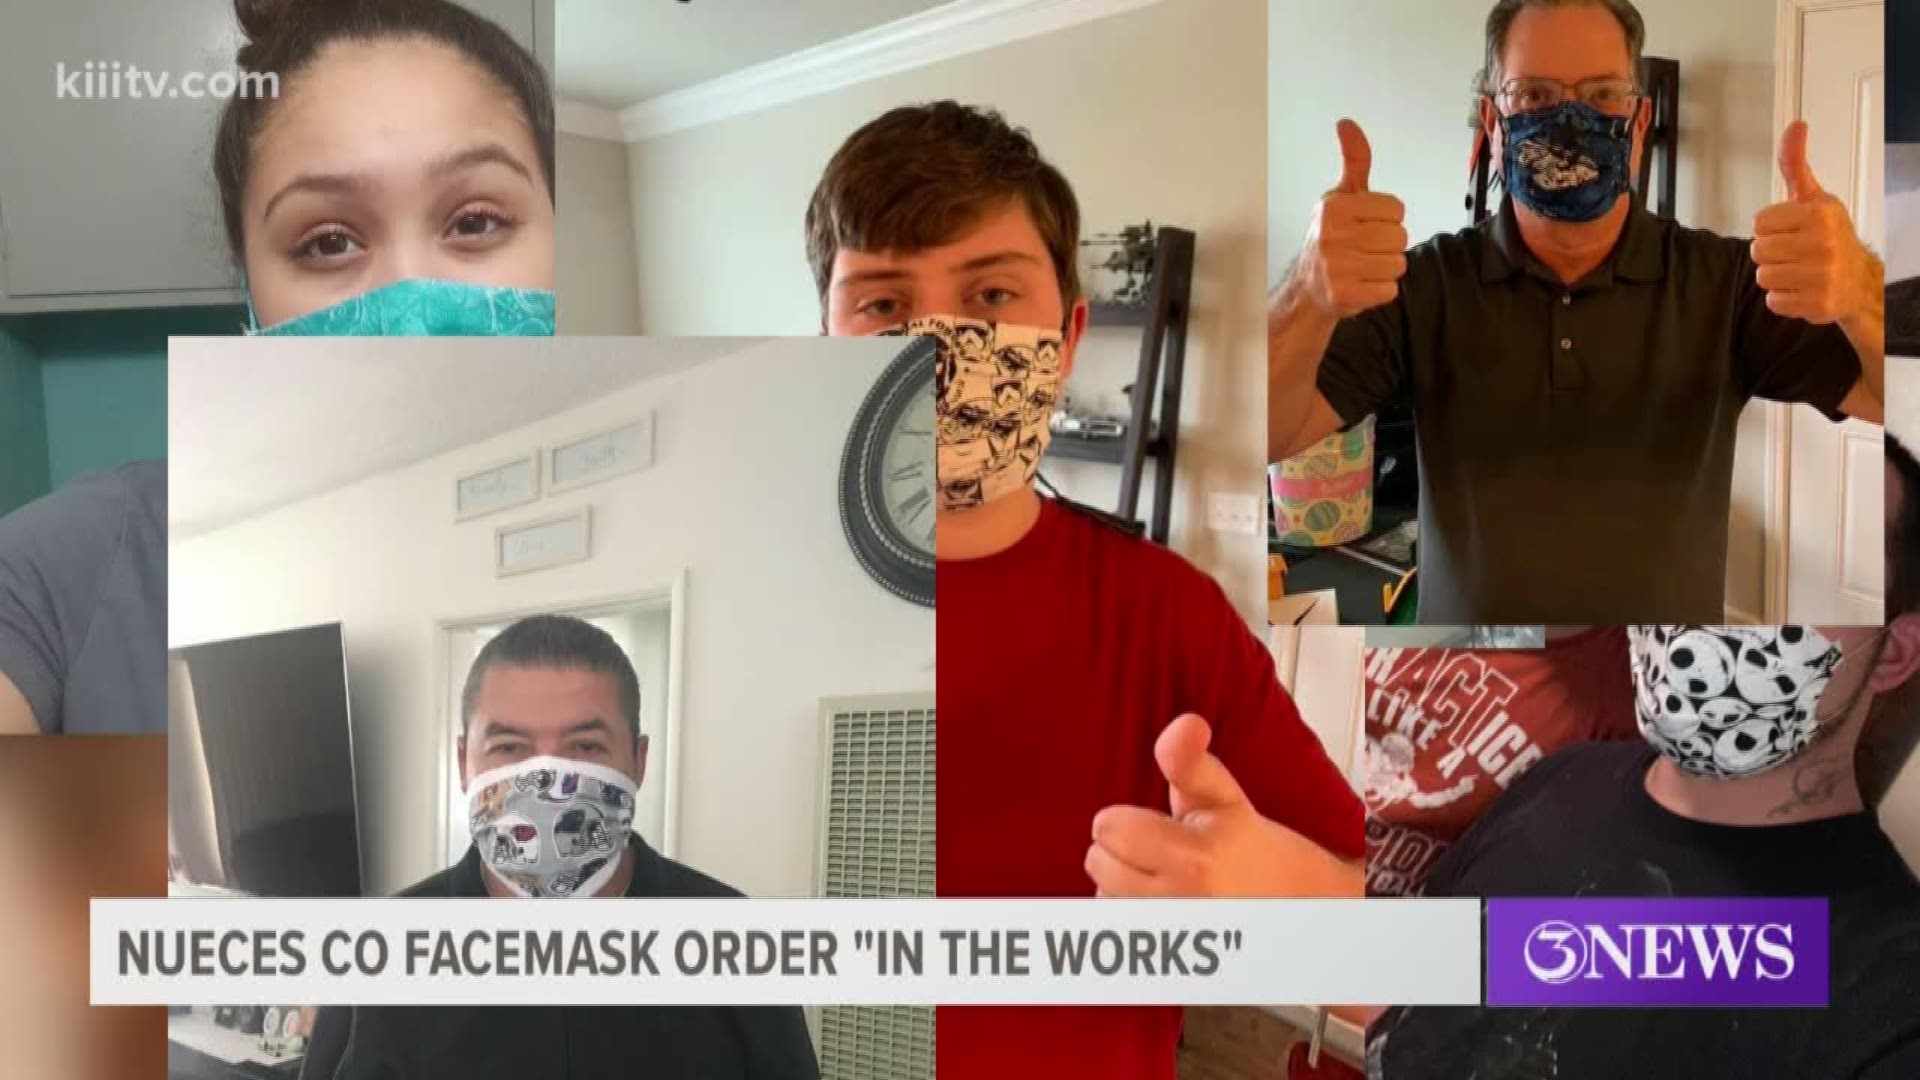 According to Nueces County Judge Barbara Canales, a new order on face masks for area businesses could be finalized by Friday.